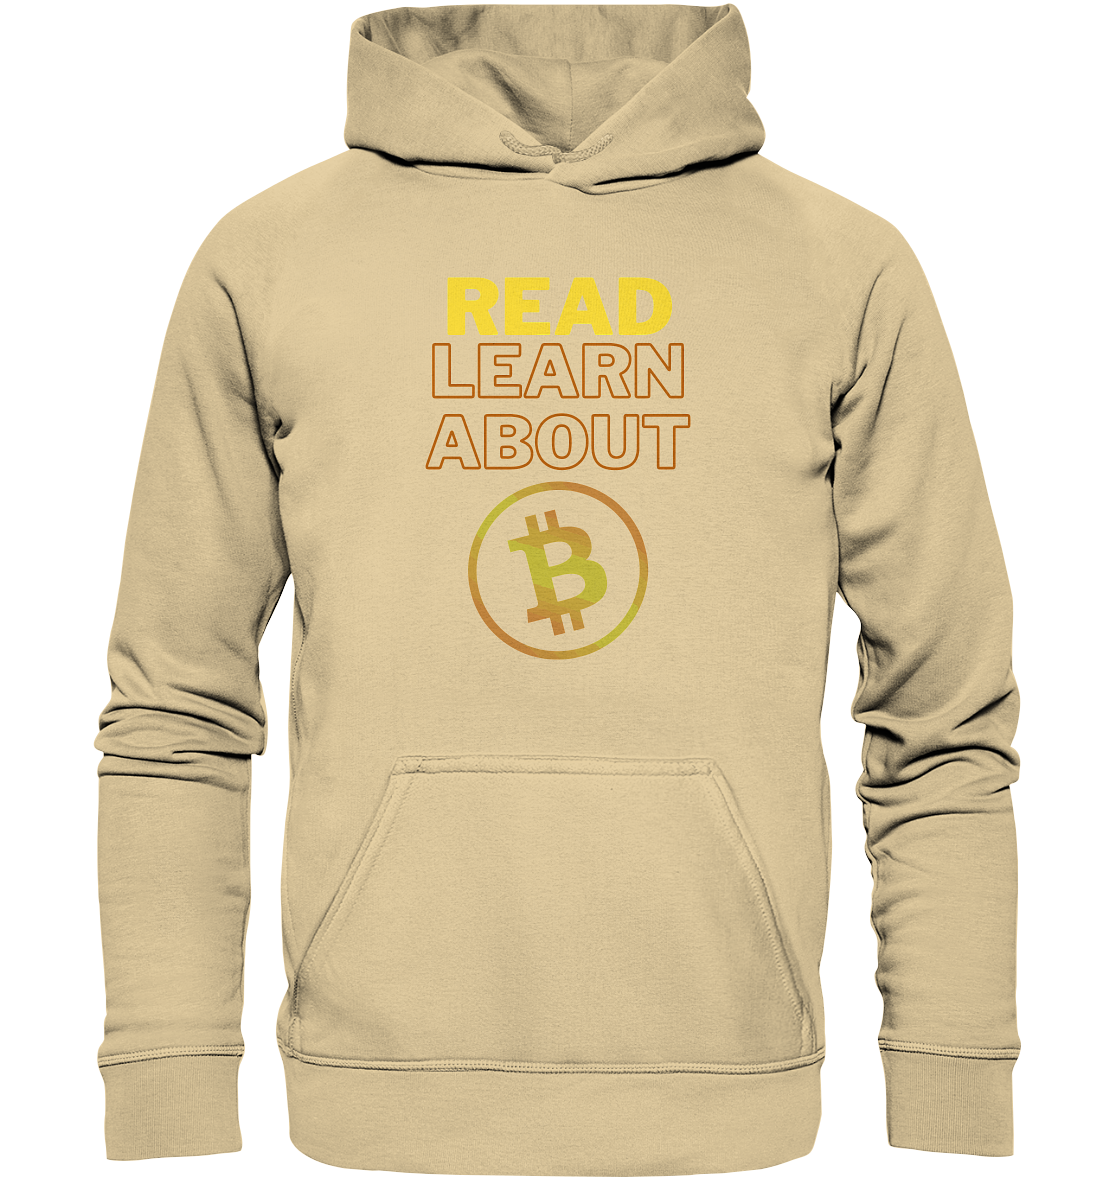 READ - LEARN ABOUT - BTC-Symbol - Basic Unisex Hoodie